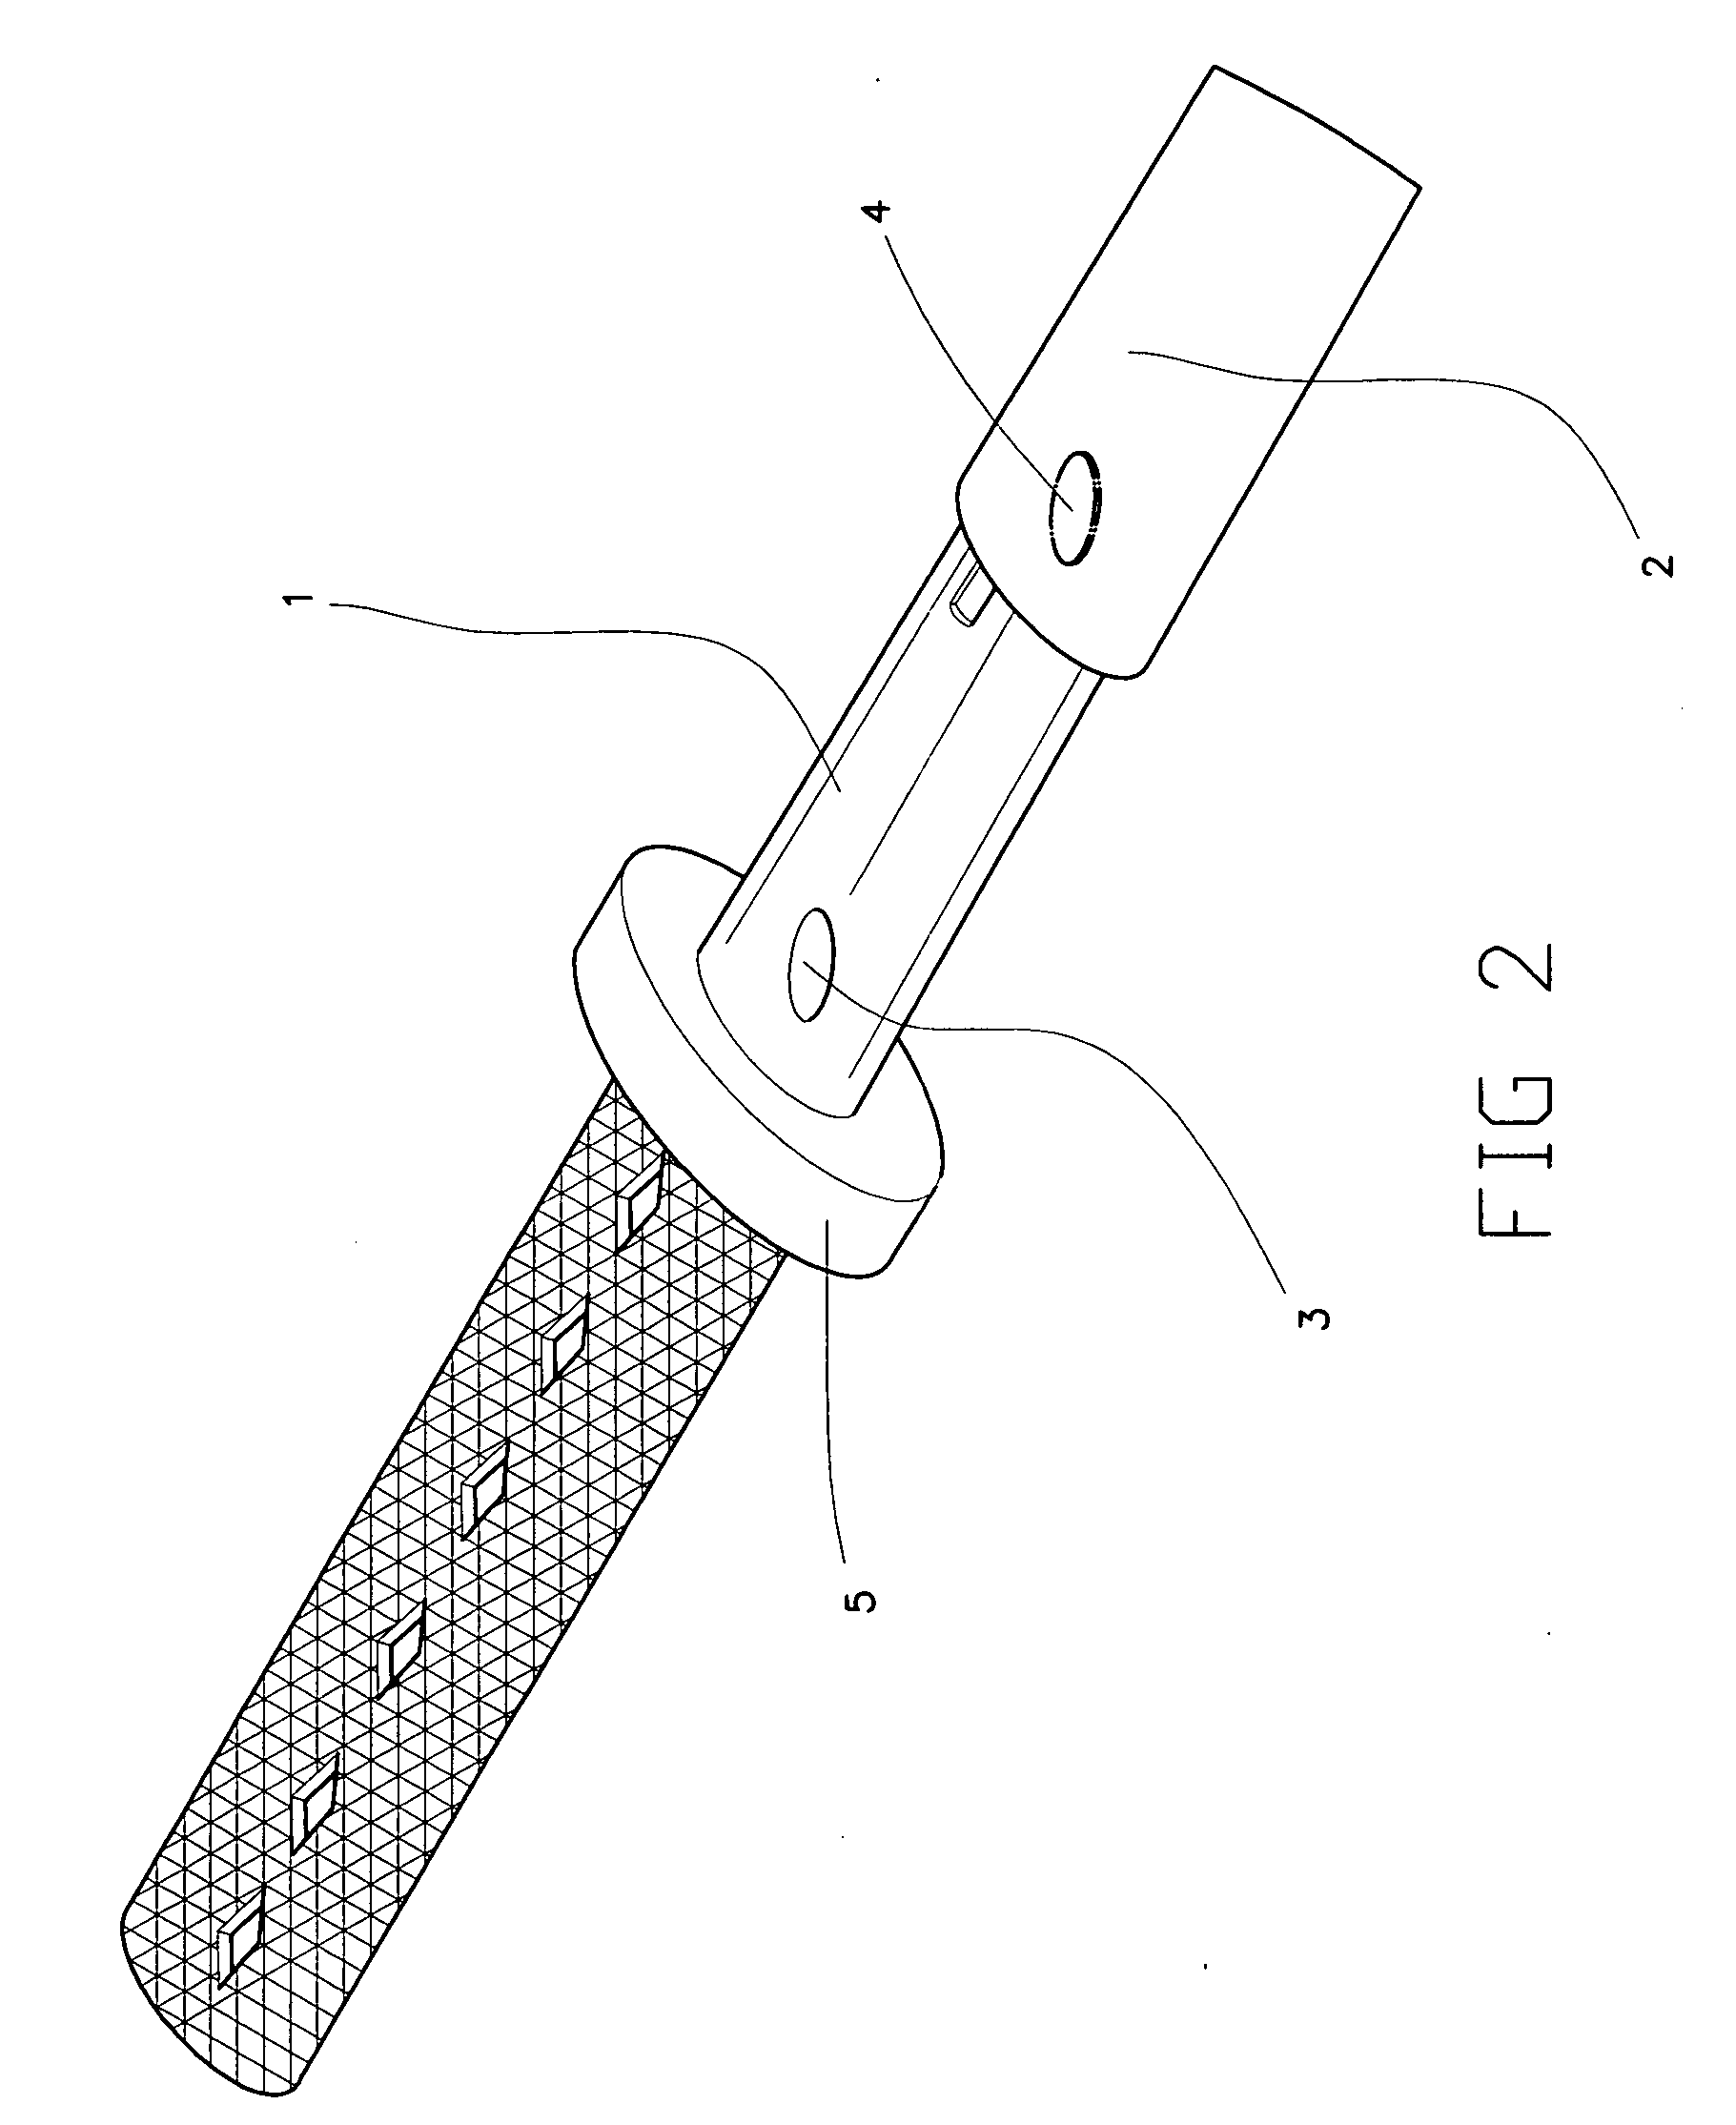 Structure for fastening sword blade to scabbard